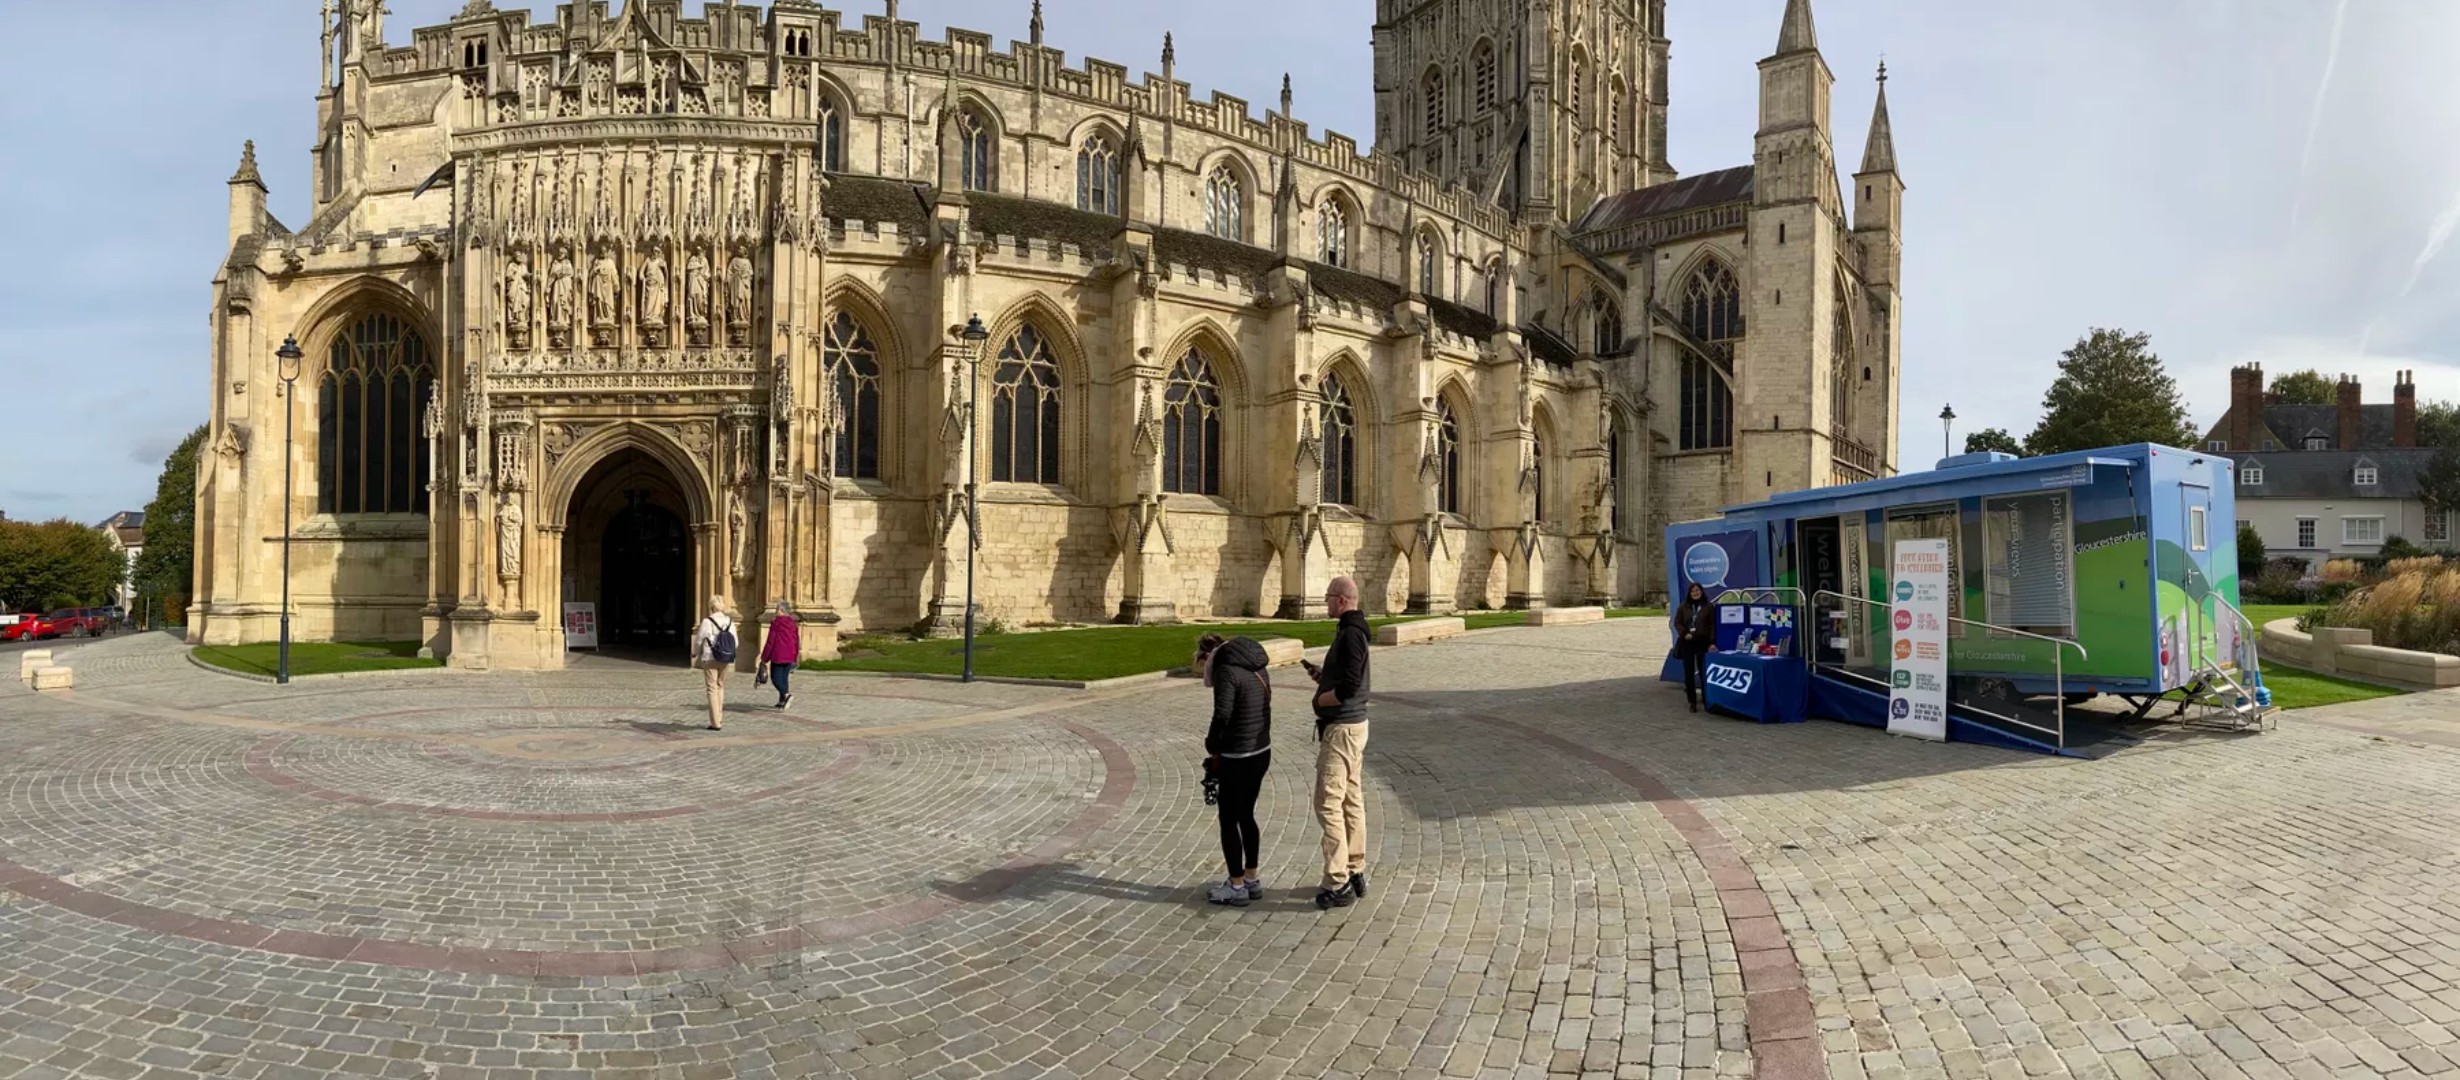 View of Gloucester Cathedral with the NHS bus parked outside